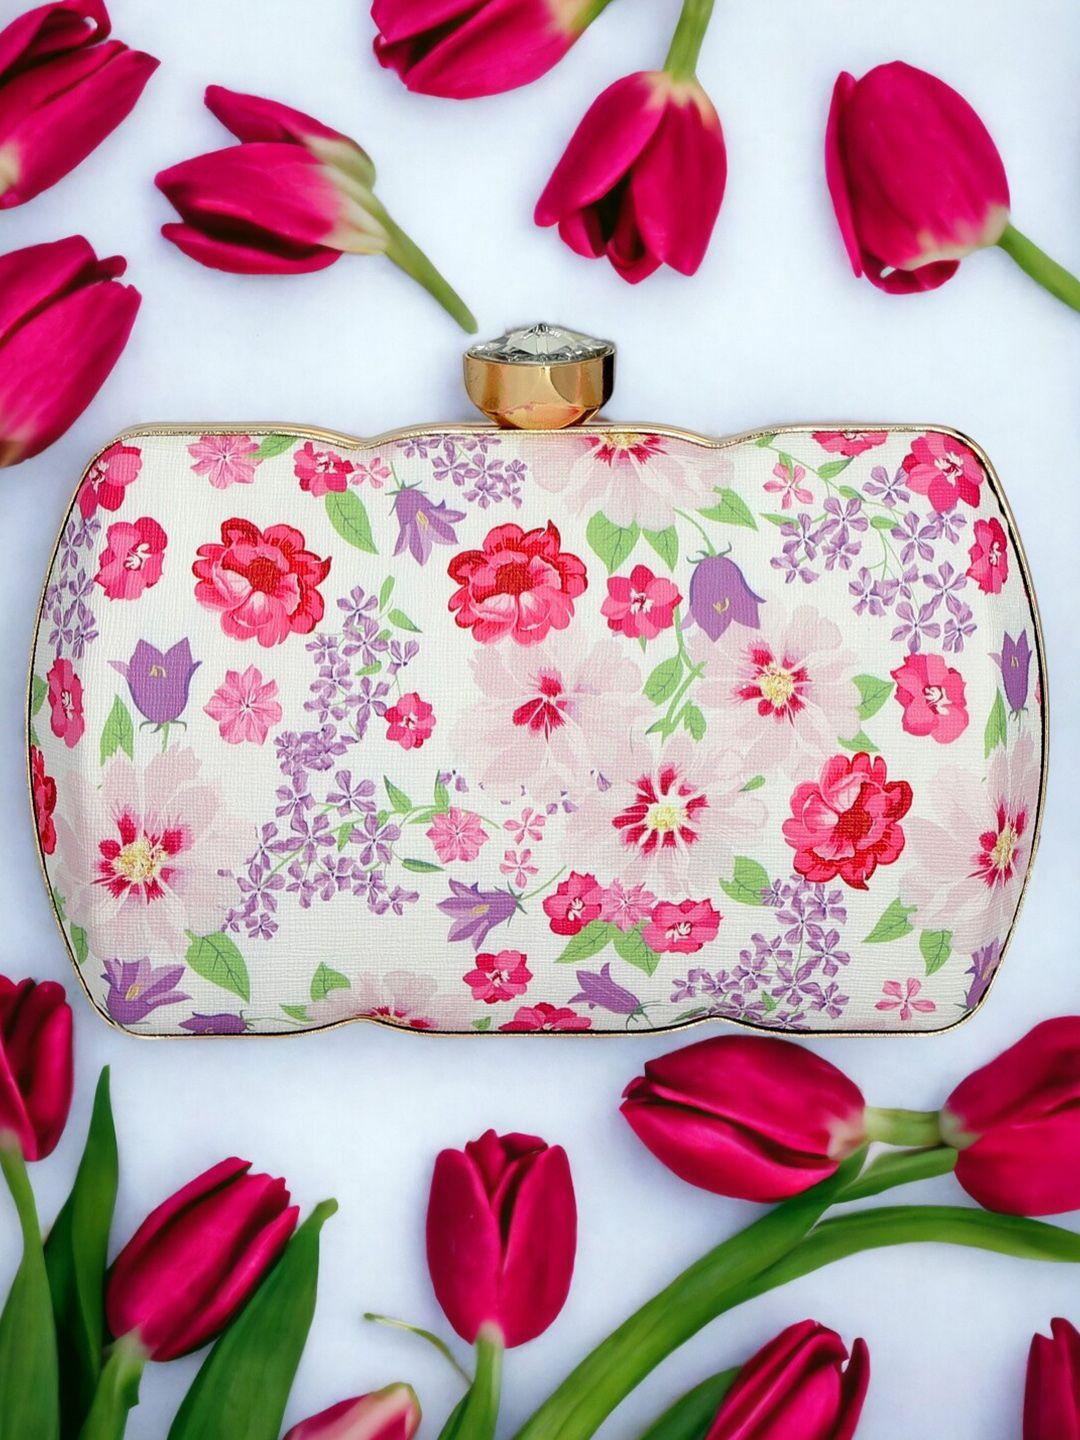 toobacraft floral printed box clutch